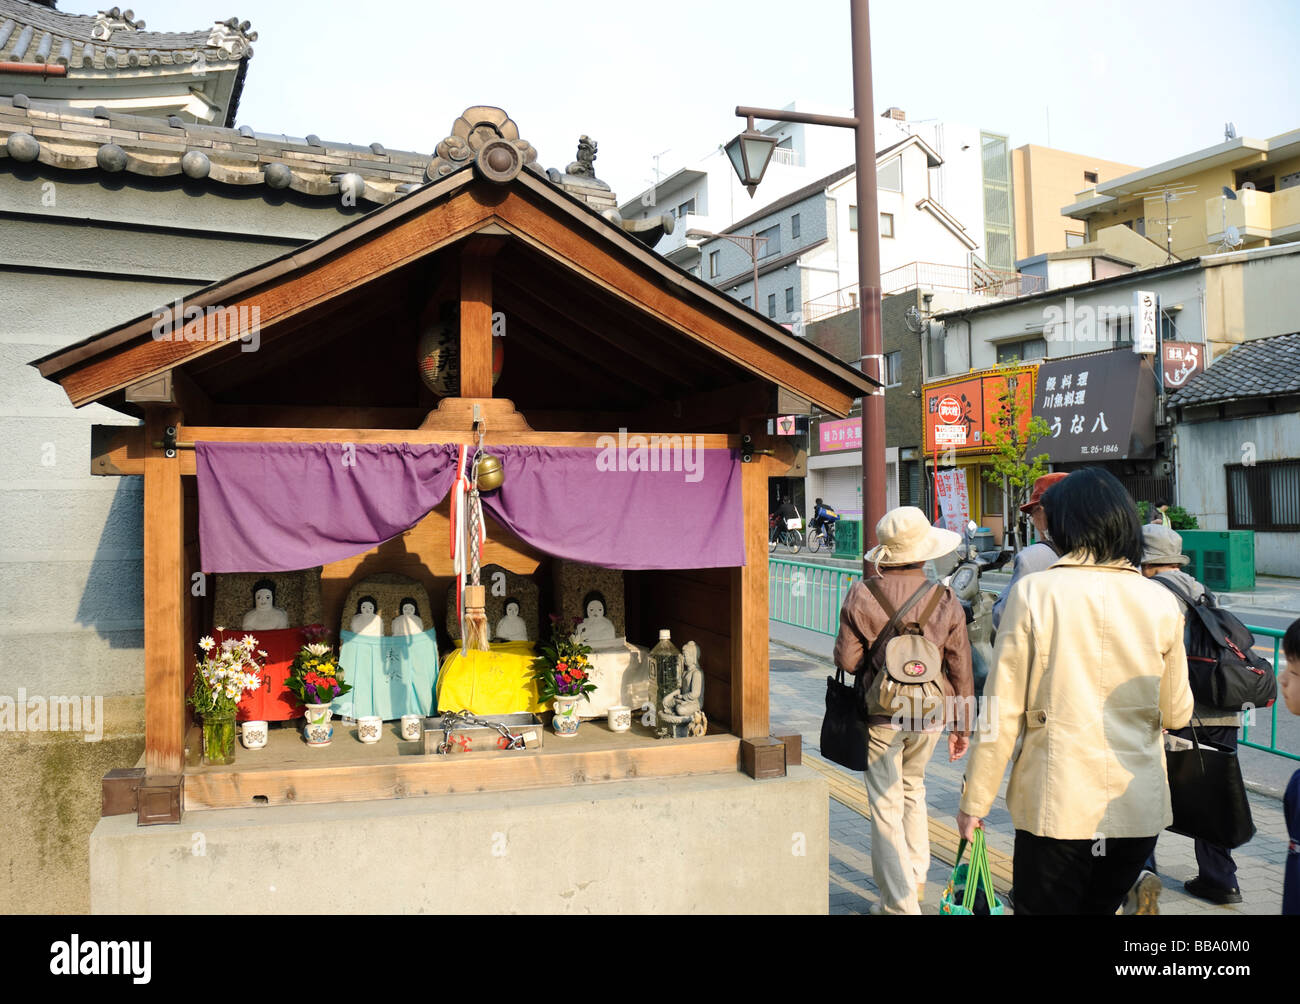 People pass a small shrine-like roadside structure in Ibaraki, a suburb of Osaka, Japan. Such street scenes are very typical. Stock Photo